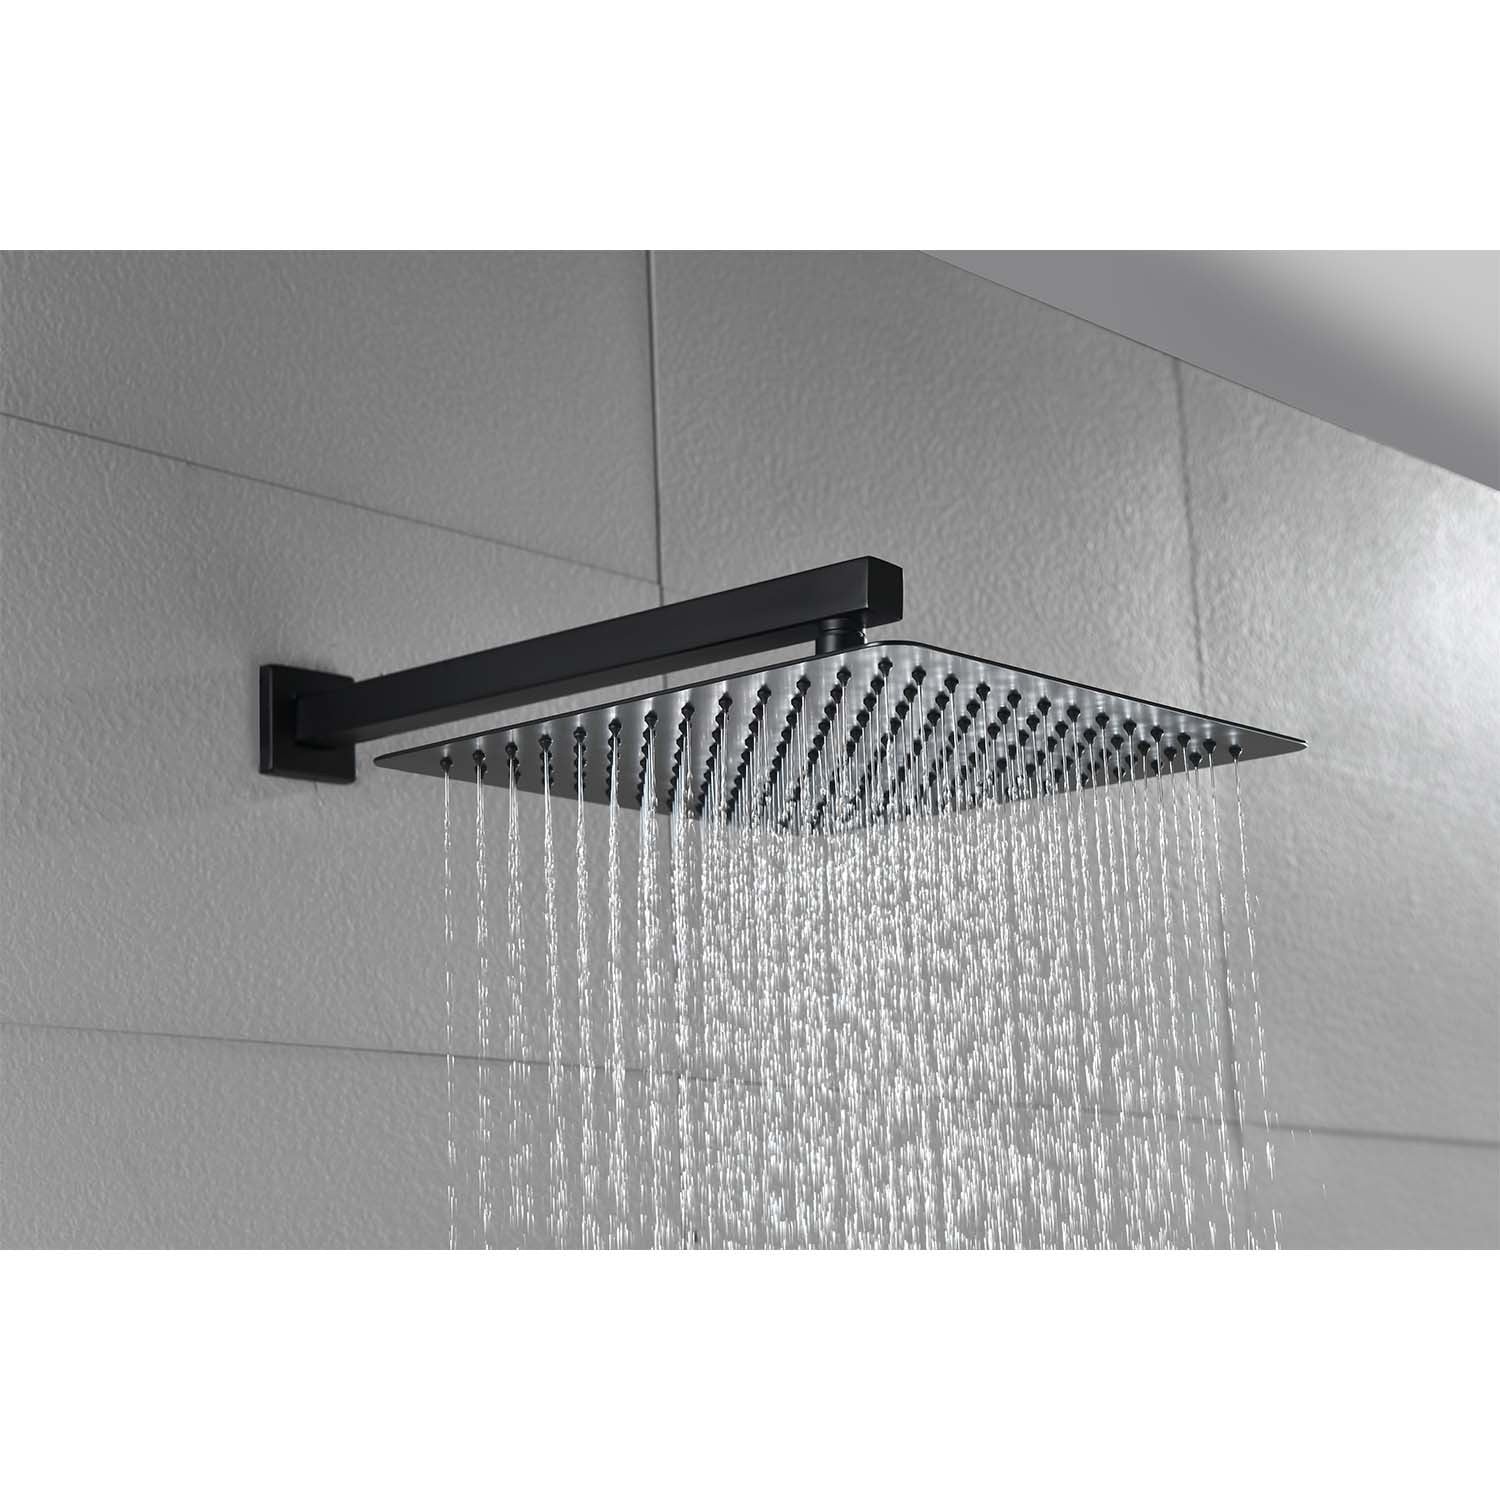 10" Rain Shower Head Systems Wall Mounted Shower